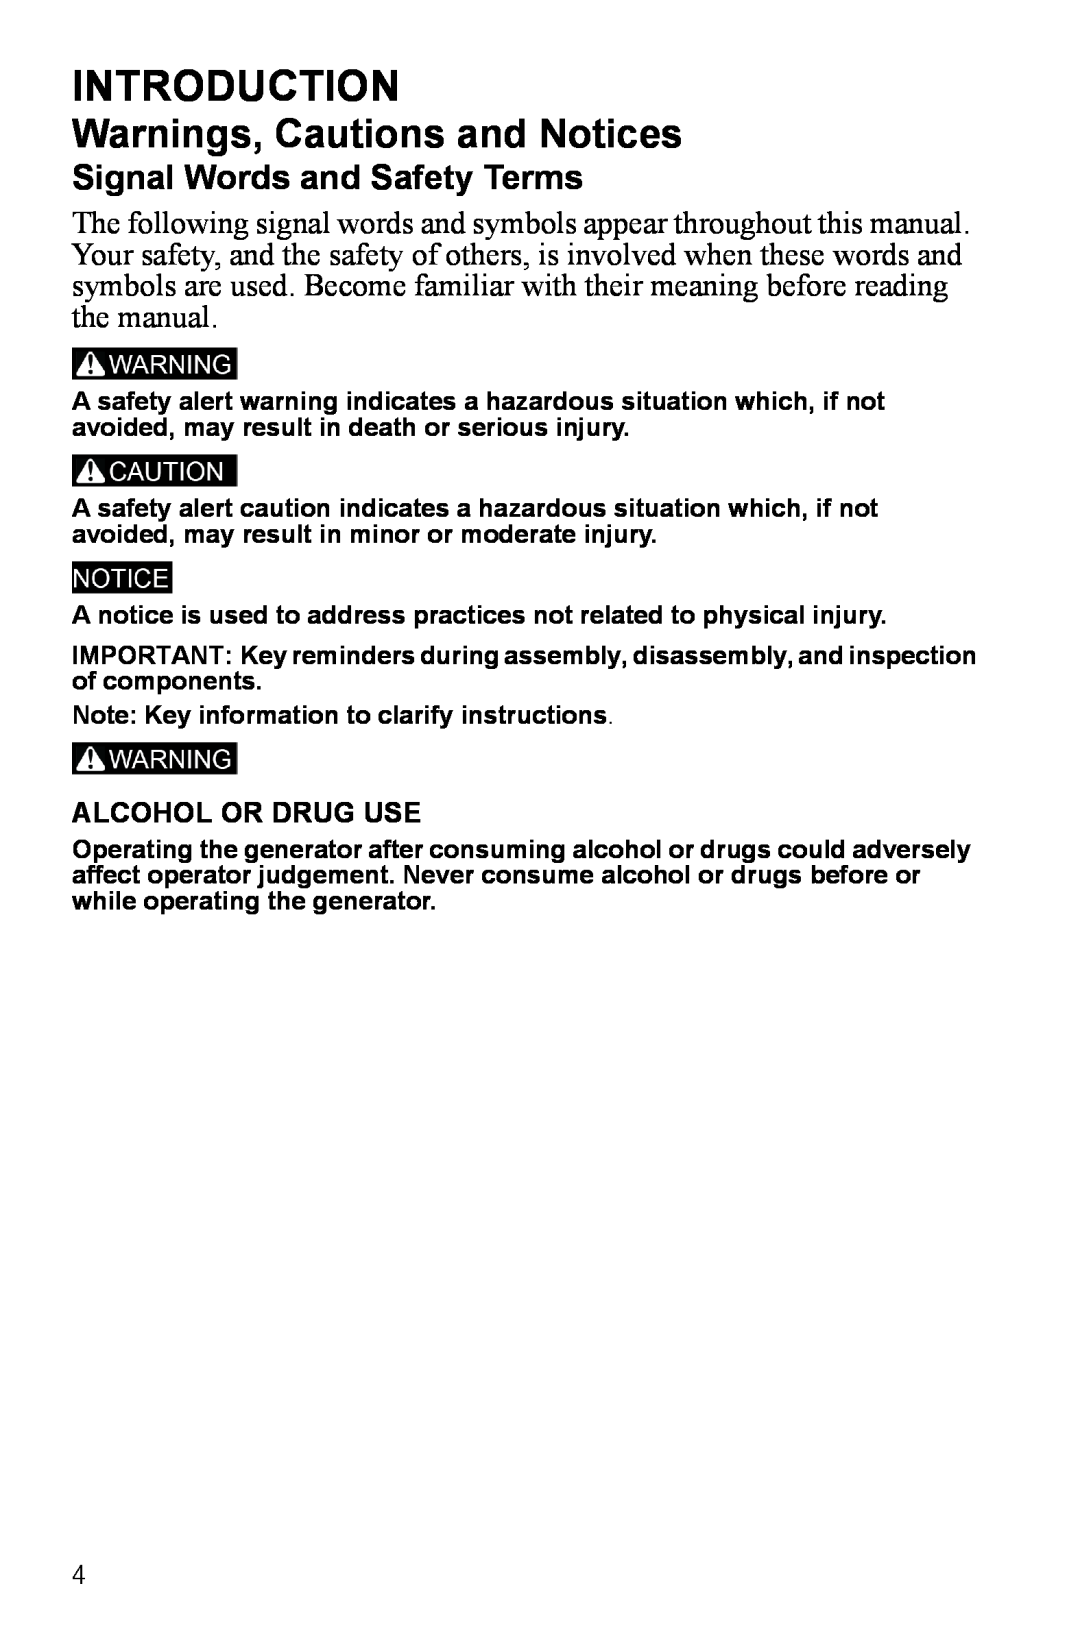 Polaris P3000iE manual Introduction, Warnings, Cautions and Notices, Signal Words and Safety Terms, Alcohol Or Drug Use 